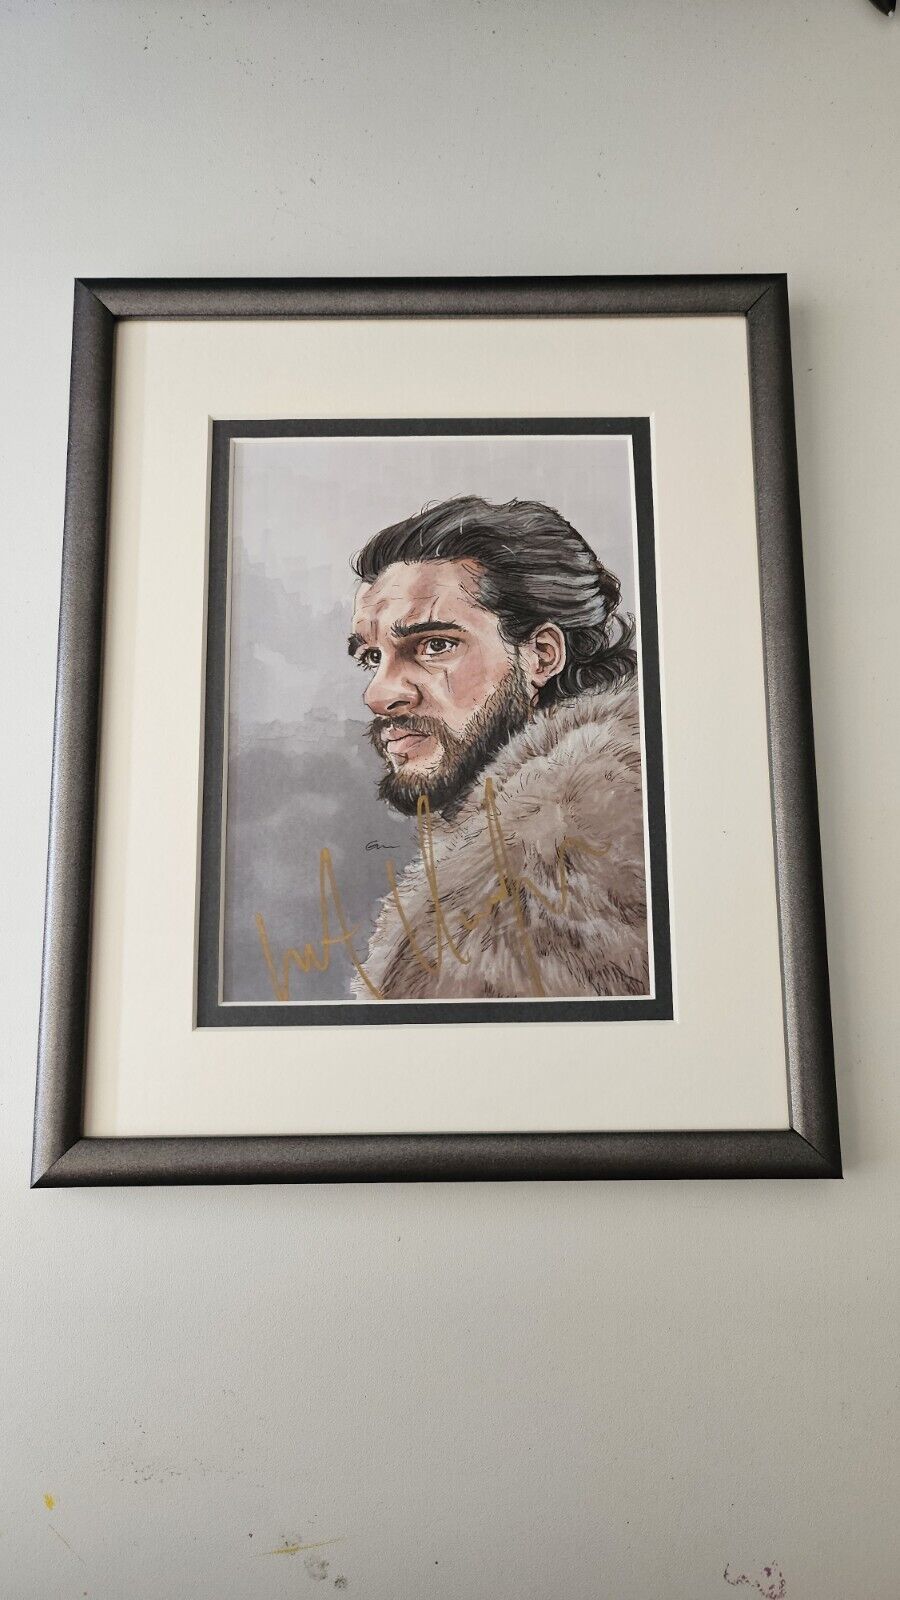 Original Framed Artwork Jon Snow Game Of Thrones Autographed One Of A Kind